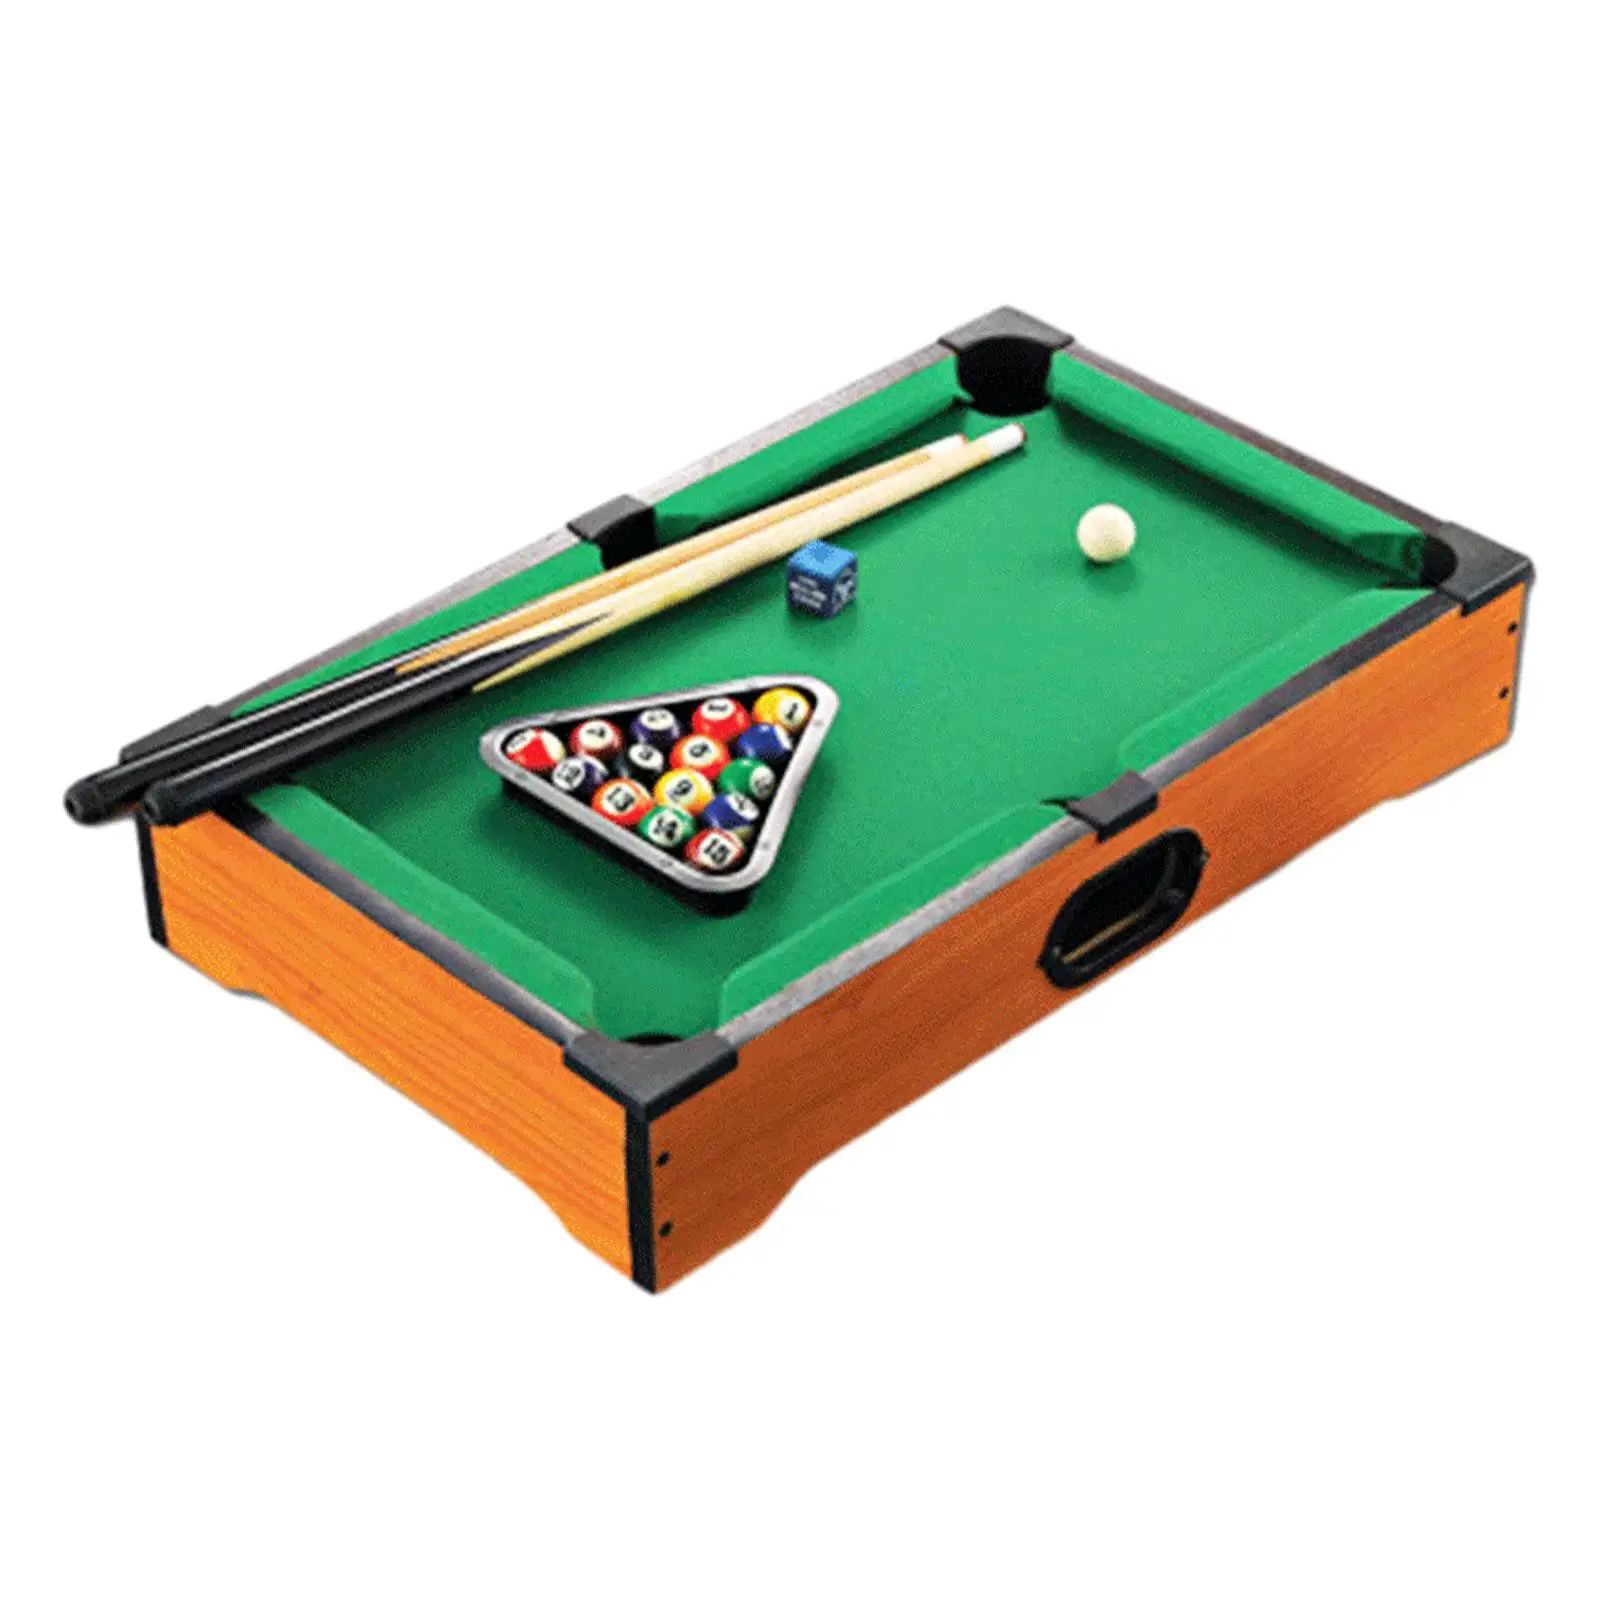 Mini Pool Table Portable Easy to Install Playset Balls Snooker Billiards Playset for Desktop Office Living Room Playhouse Party